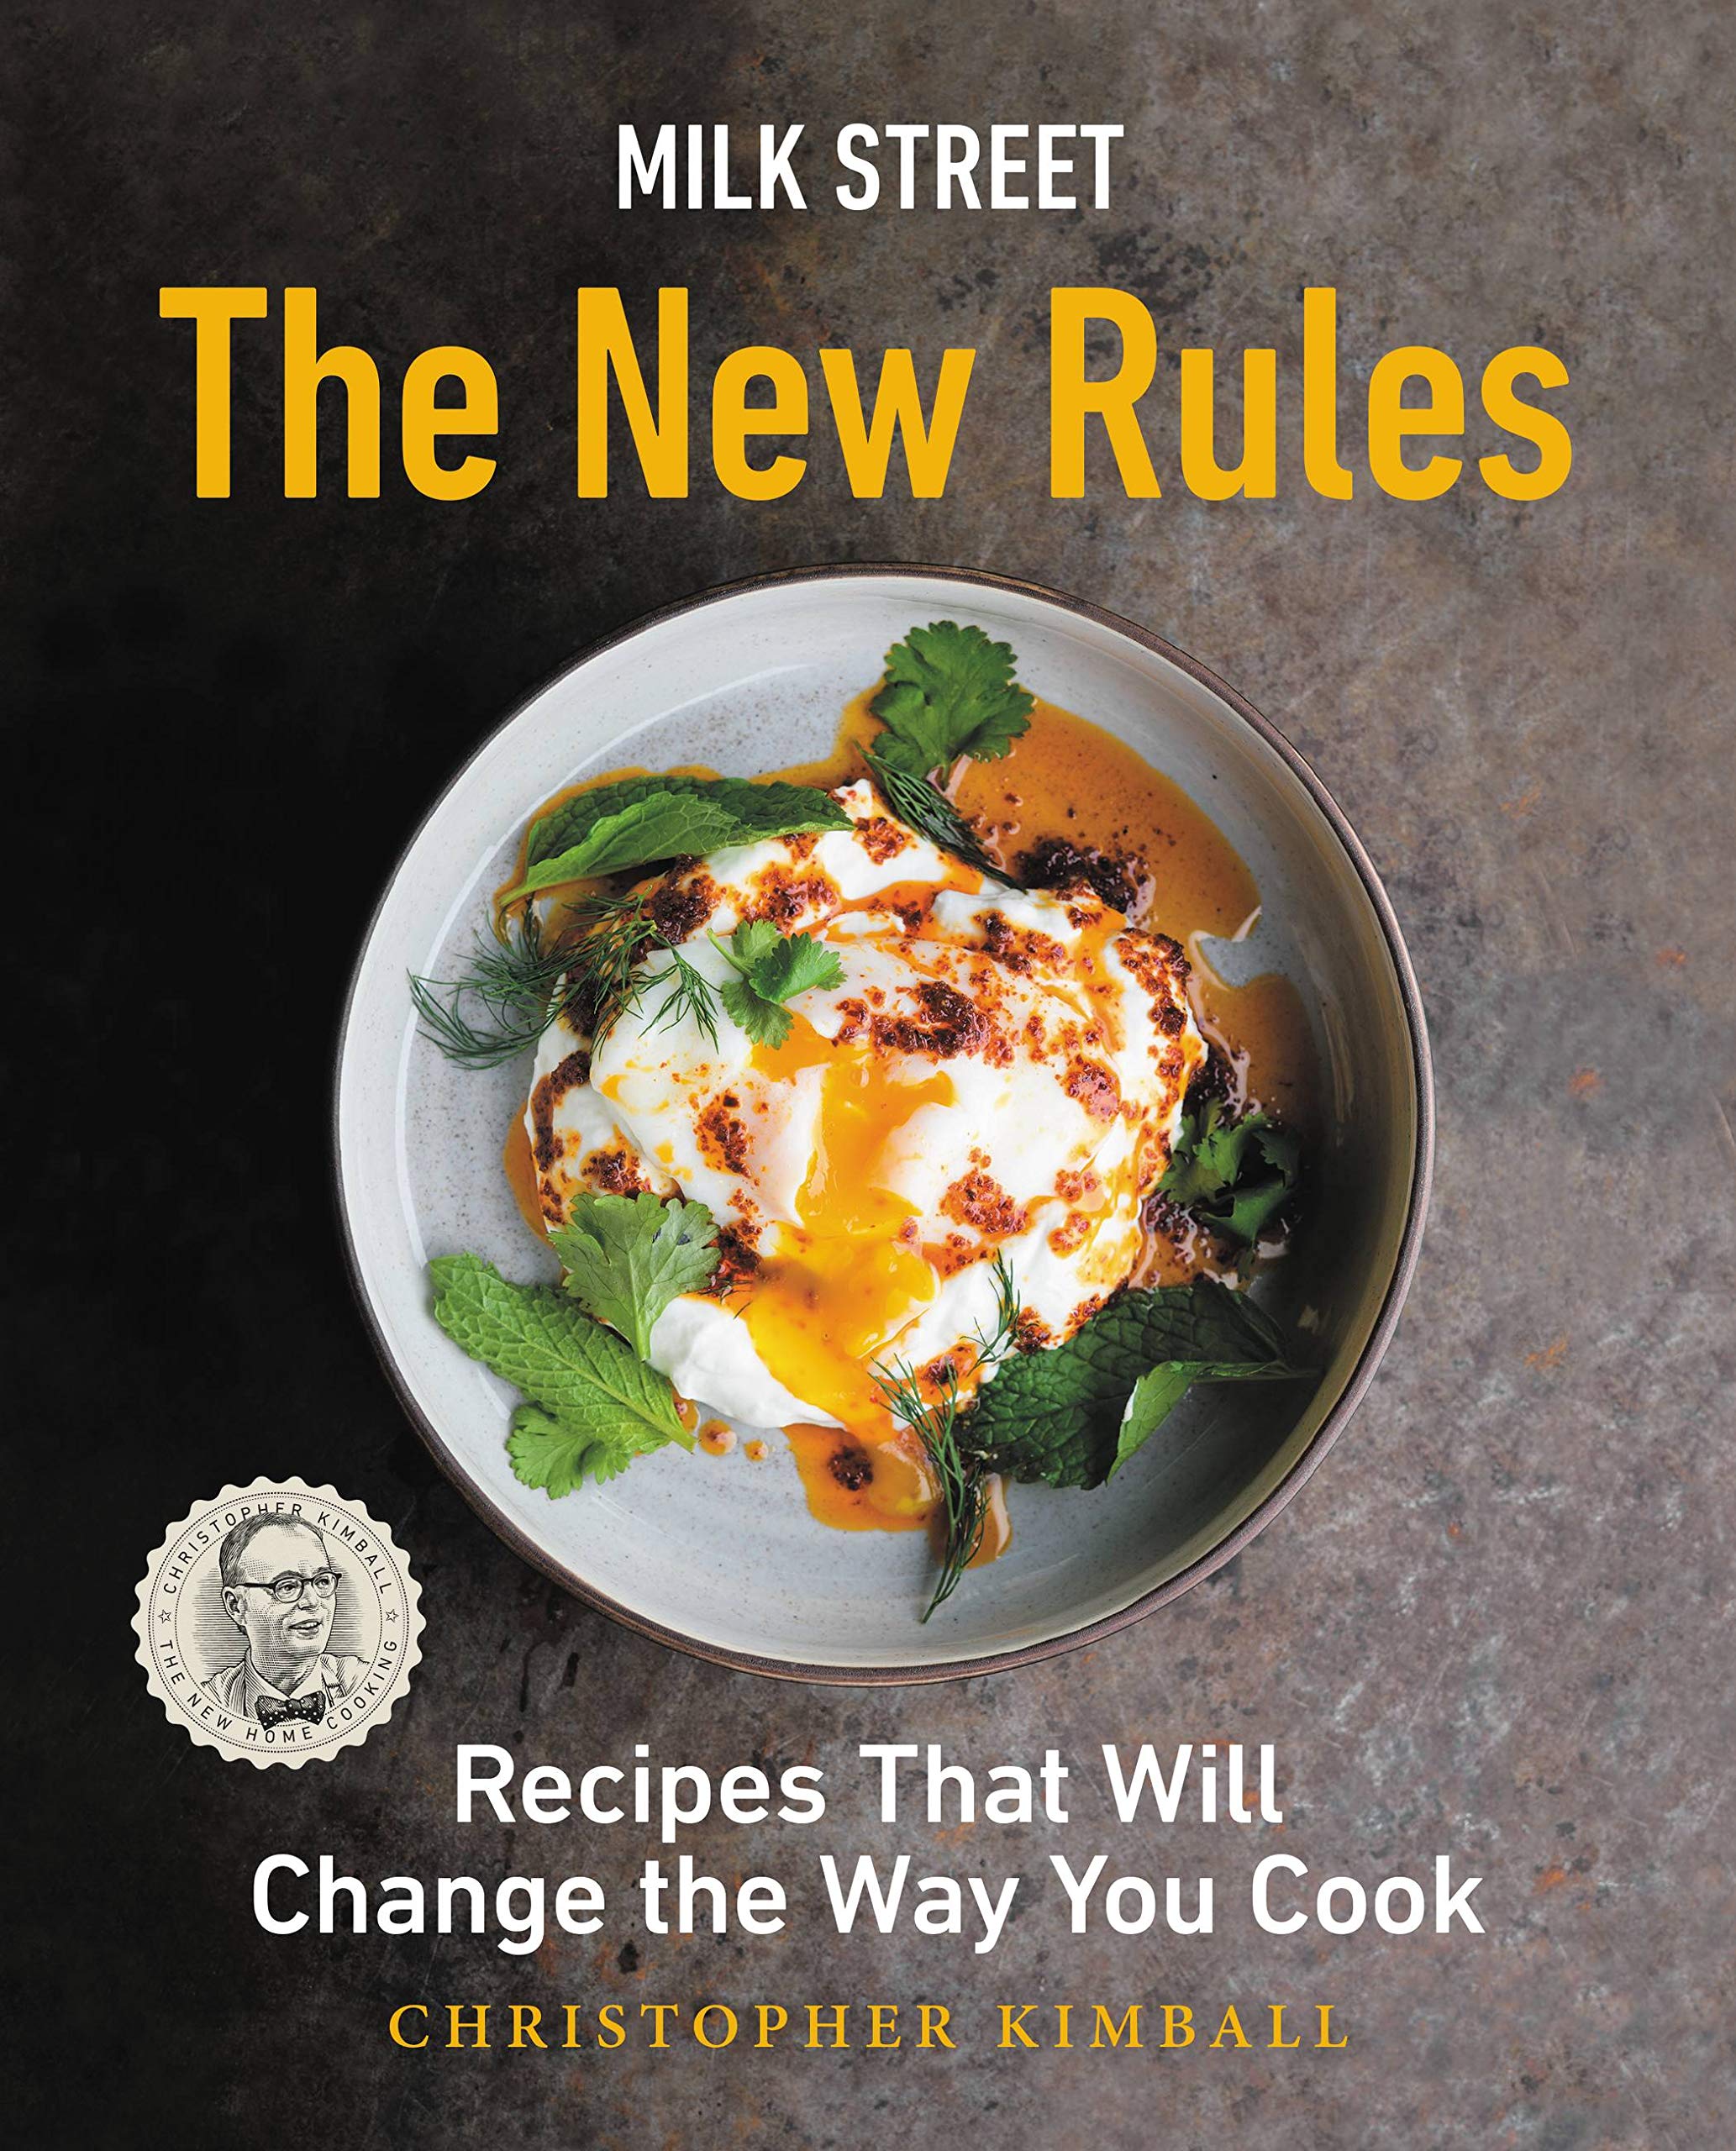 Milk Street: The New Rules: Recipes That Will Change the Way You Cook (Hardcover)